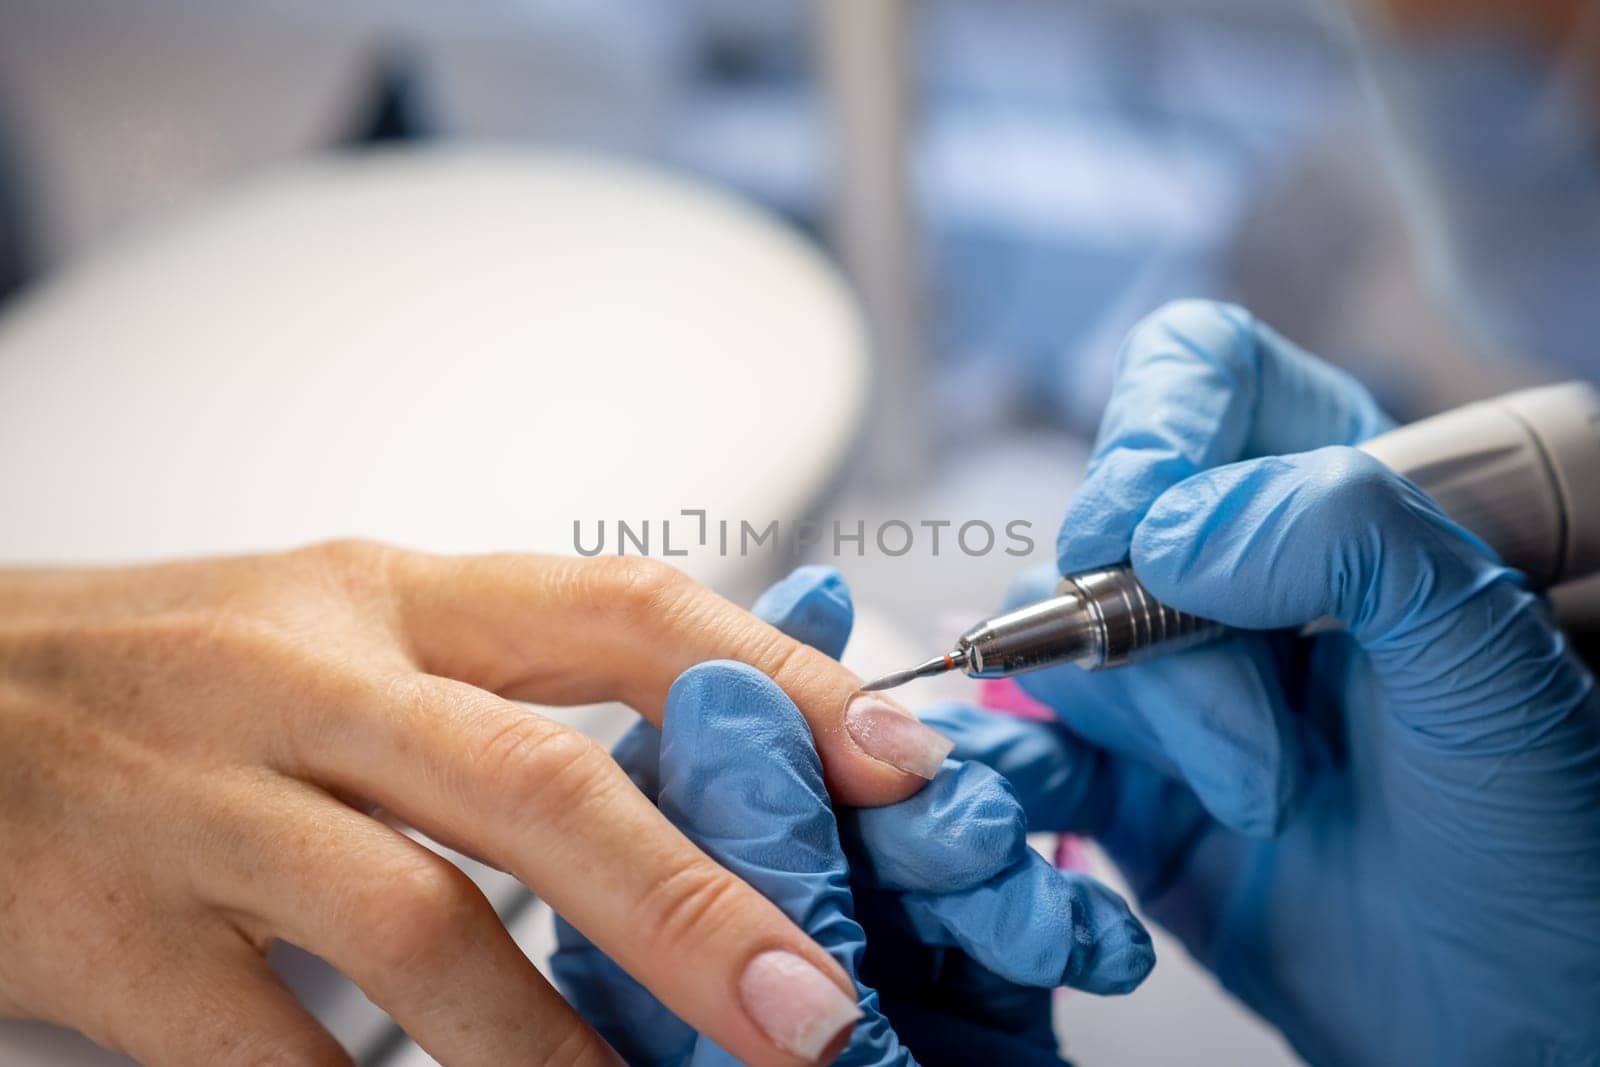 Nail care procedure in a beauty salon. Female hands and tools for manicure, process of performing manicure in beauty salon. Concept spa body care. Gloved hands of a skilled manicurist cutting cuticles